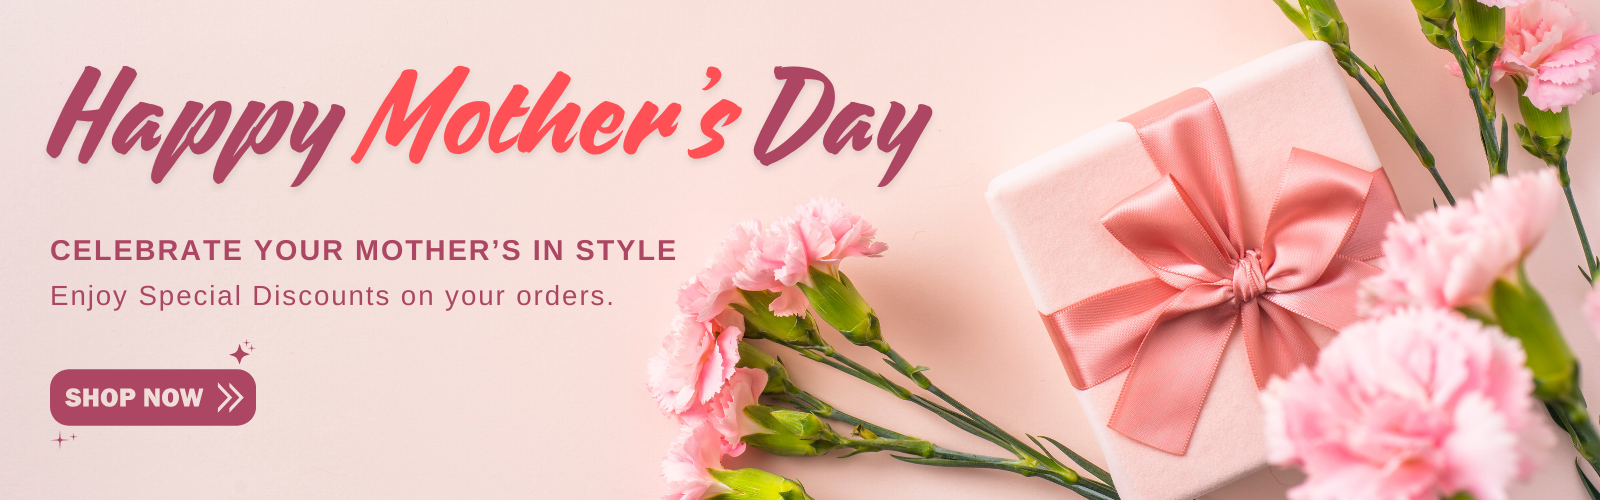 Mother's day banner 1